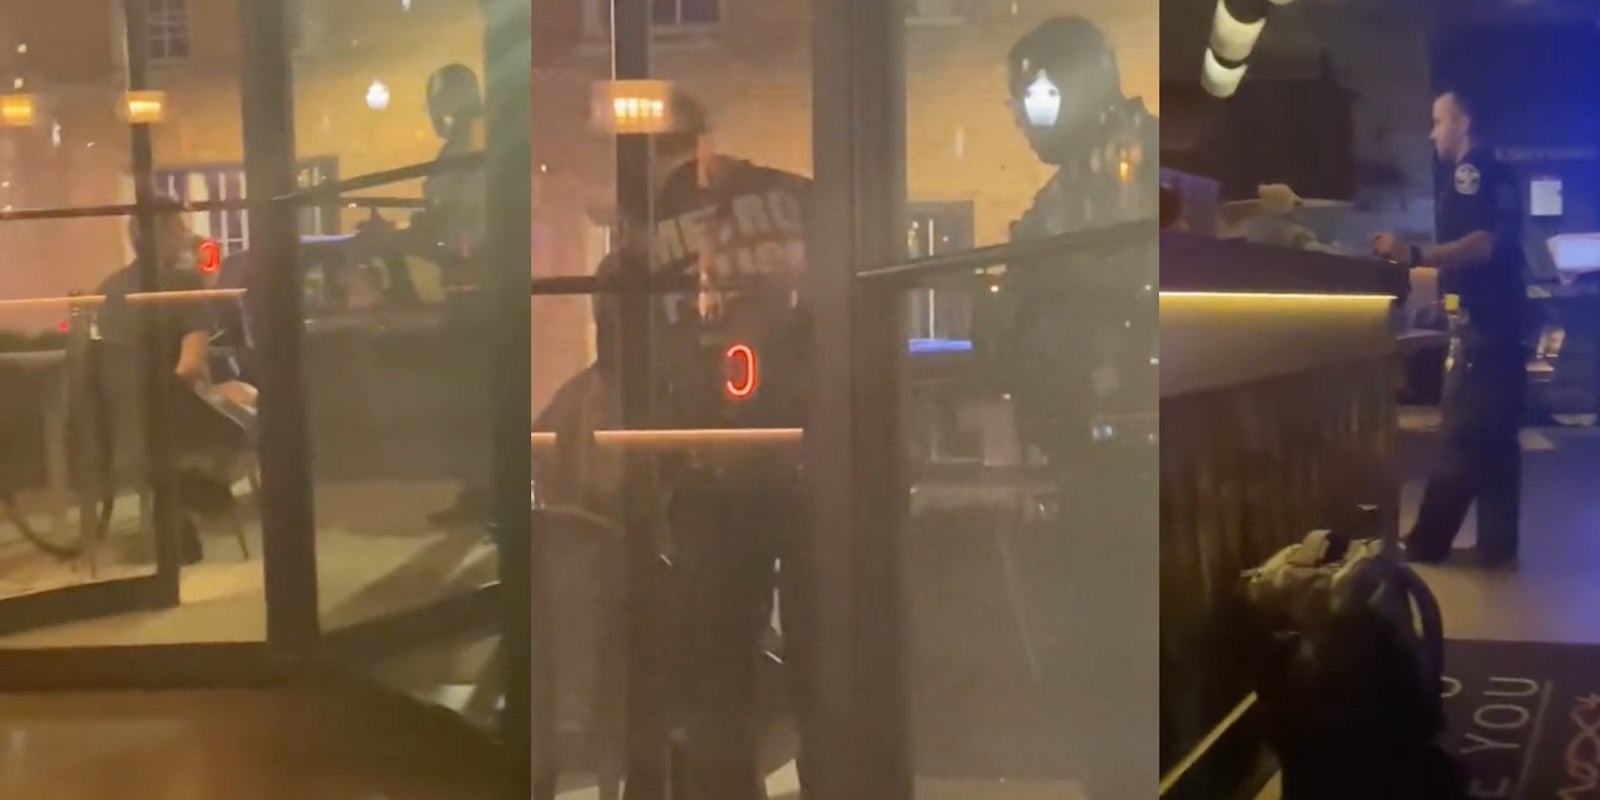 Video shows a man in cuffs outside the Moxy Downtown Louisville with LMPD